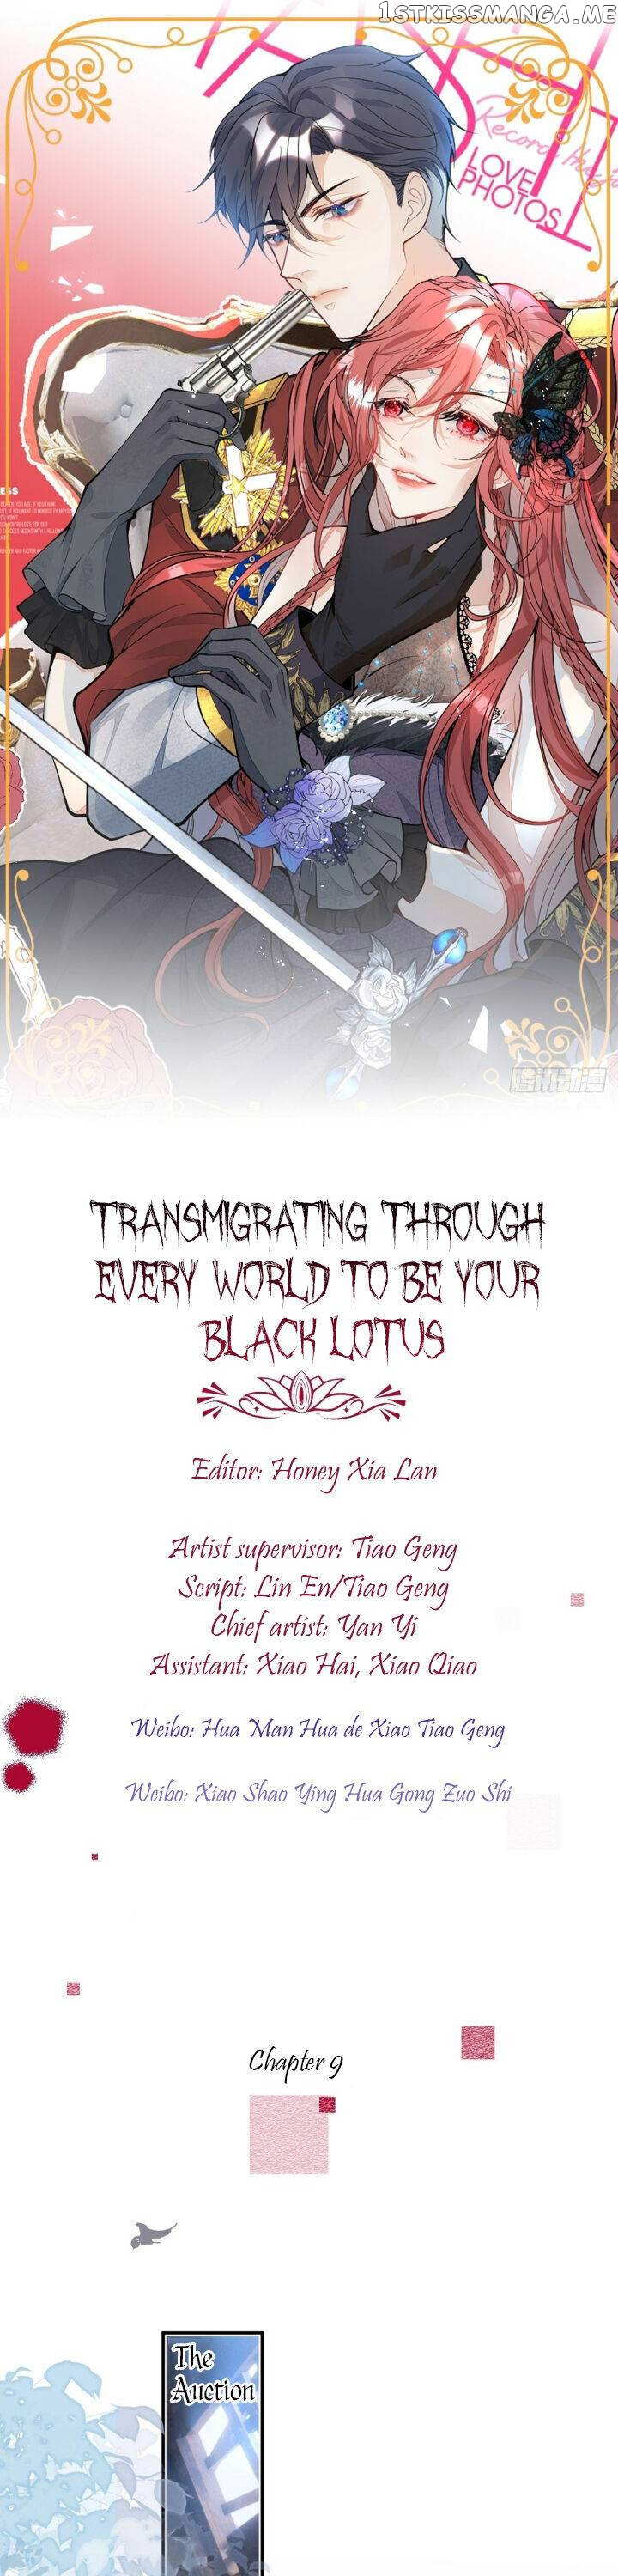 Transmigrating Through Every World To Be Your Black Lotus chapter 9 - page 1